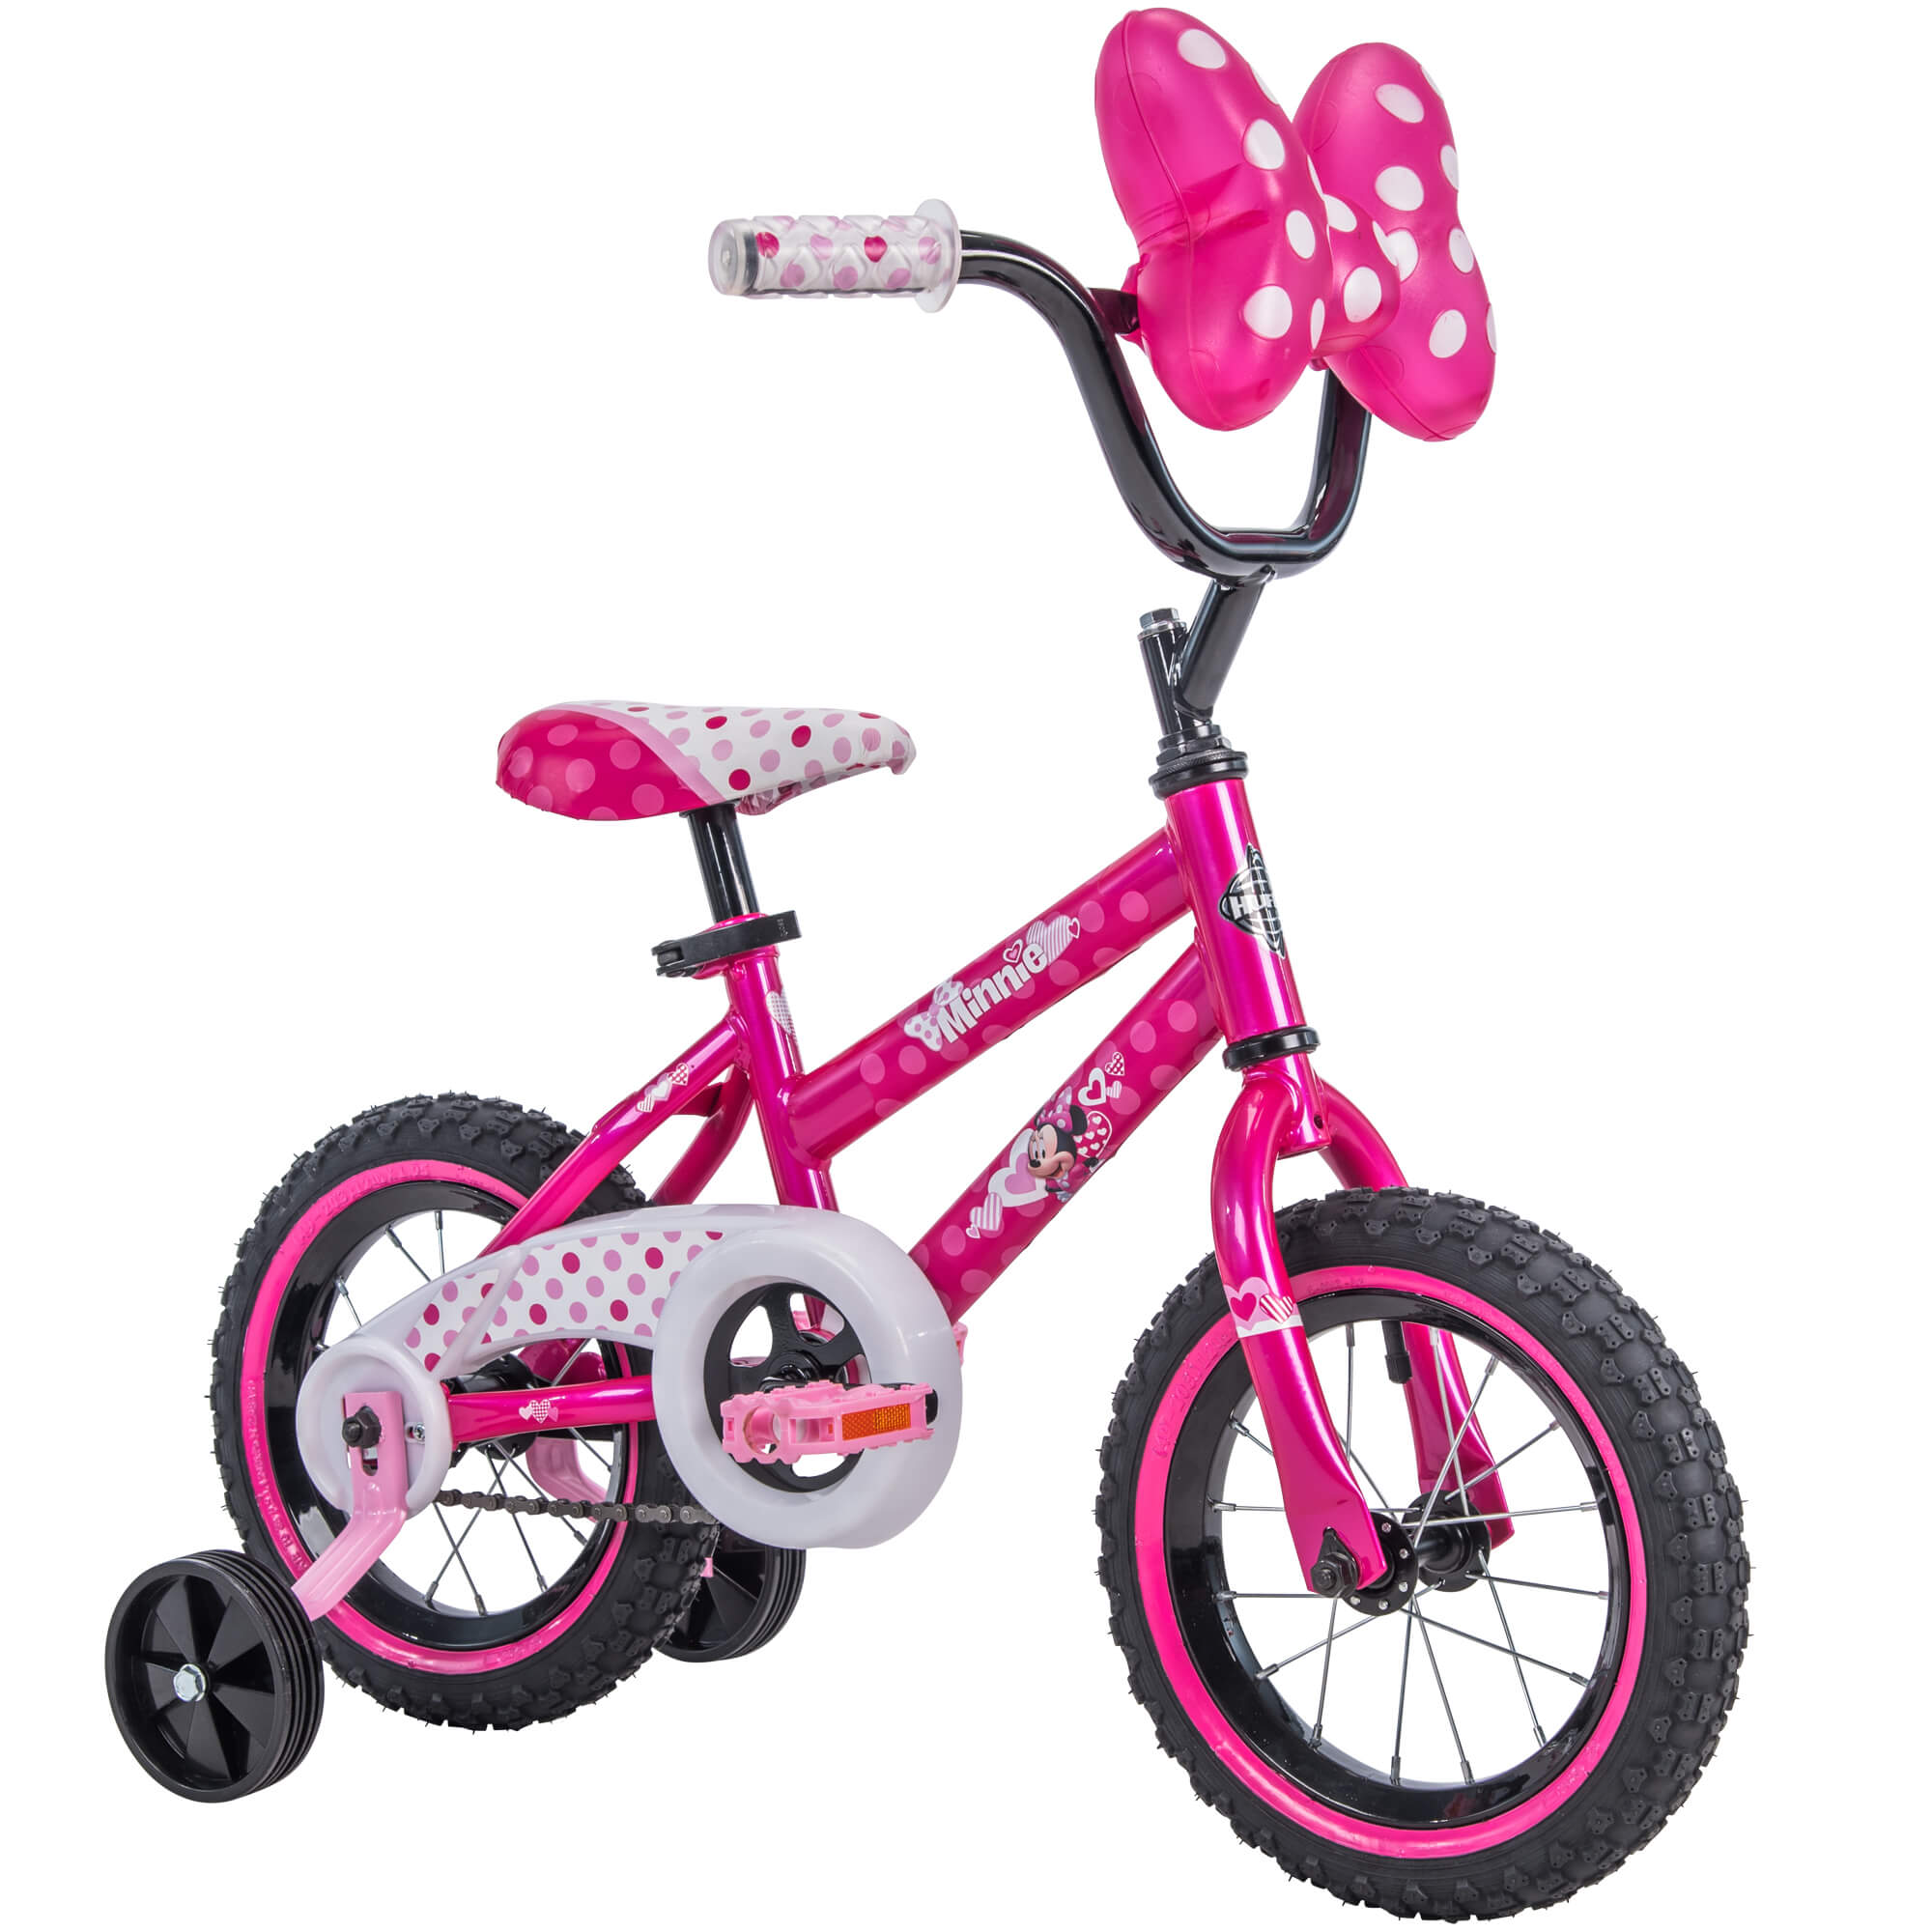 Disney Minnie Mouse 12-inch Bike by Huffy, Pink - image 1 of 6